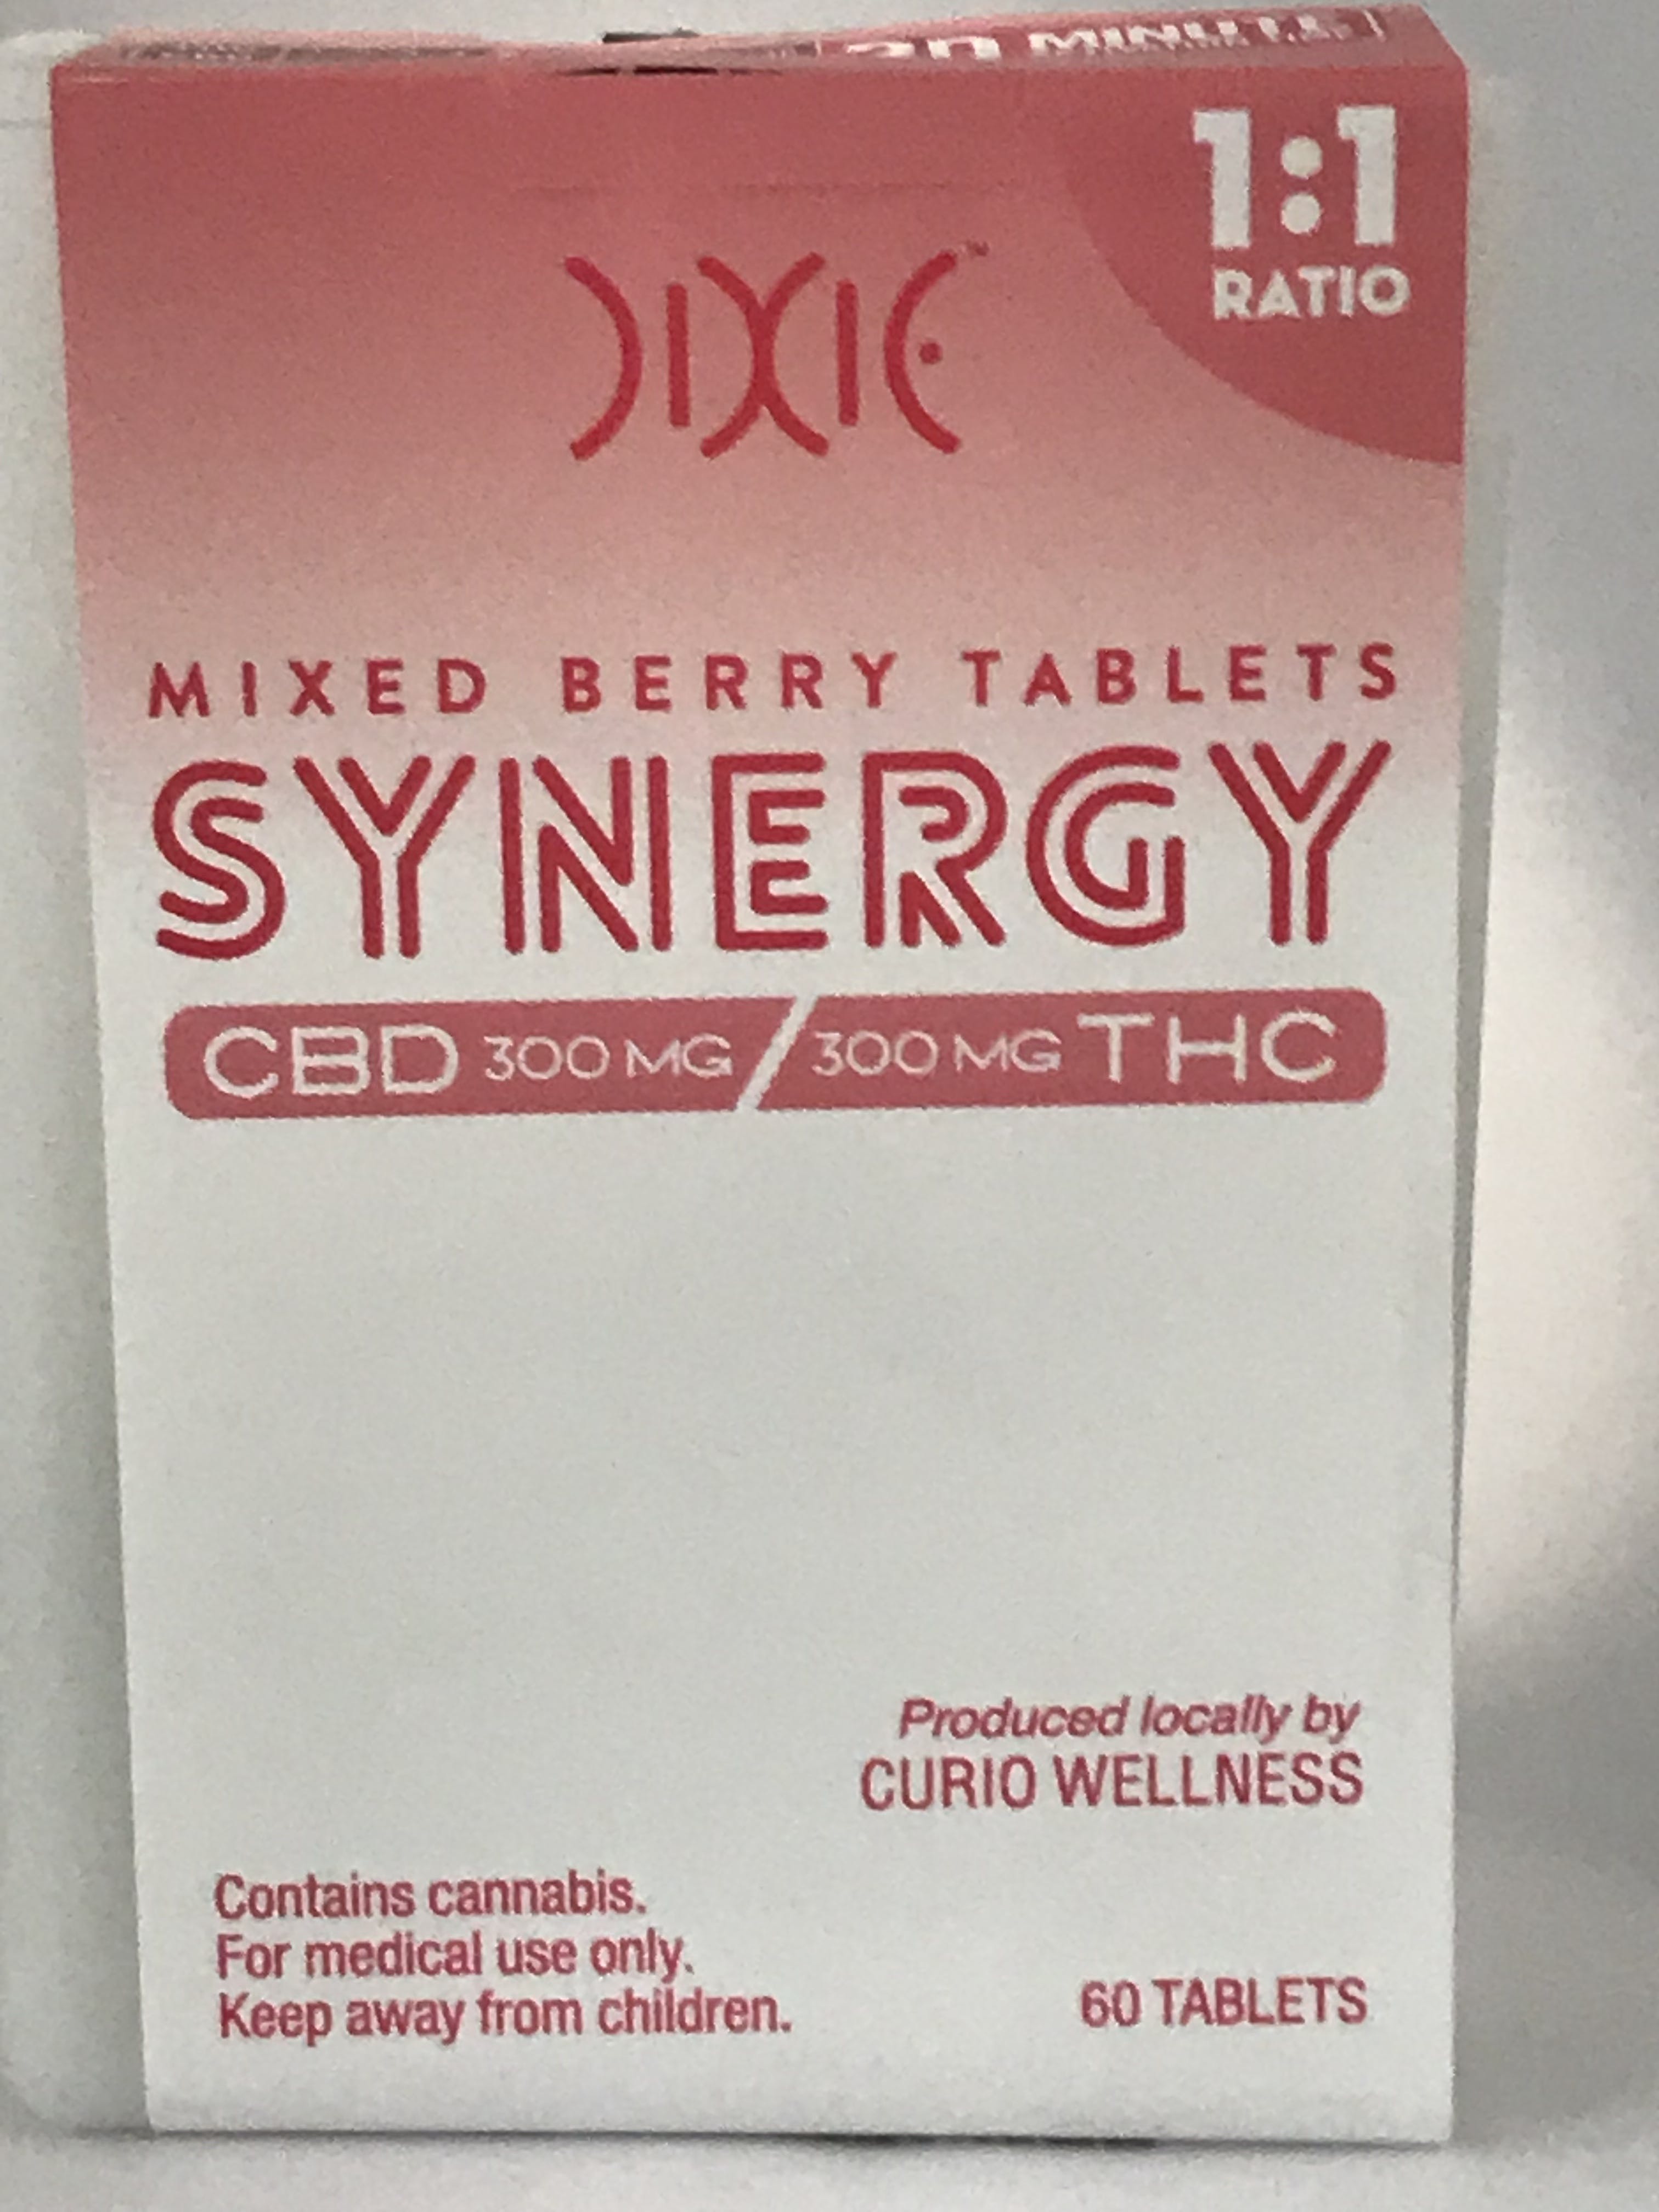 edible-synergy-tablets-mixed-berry-300mg